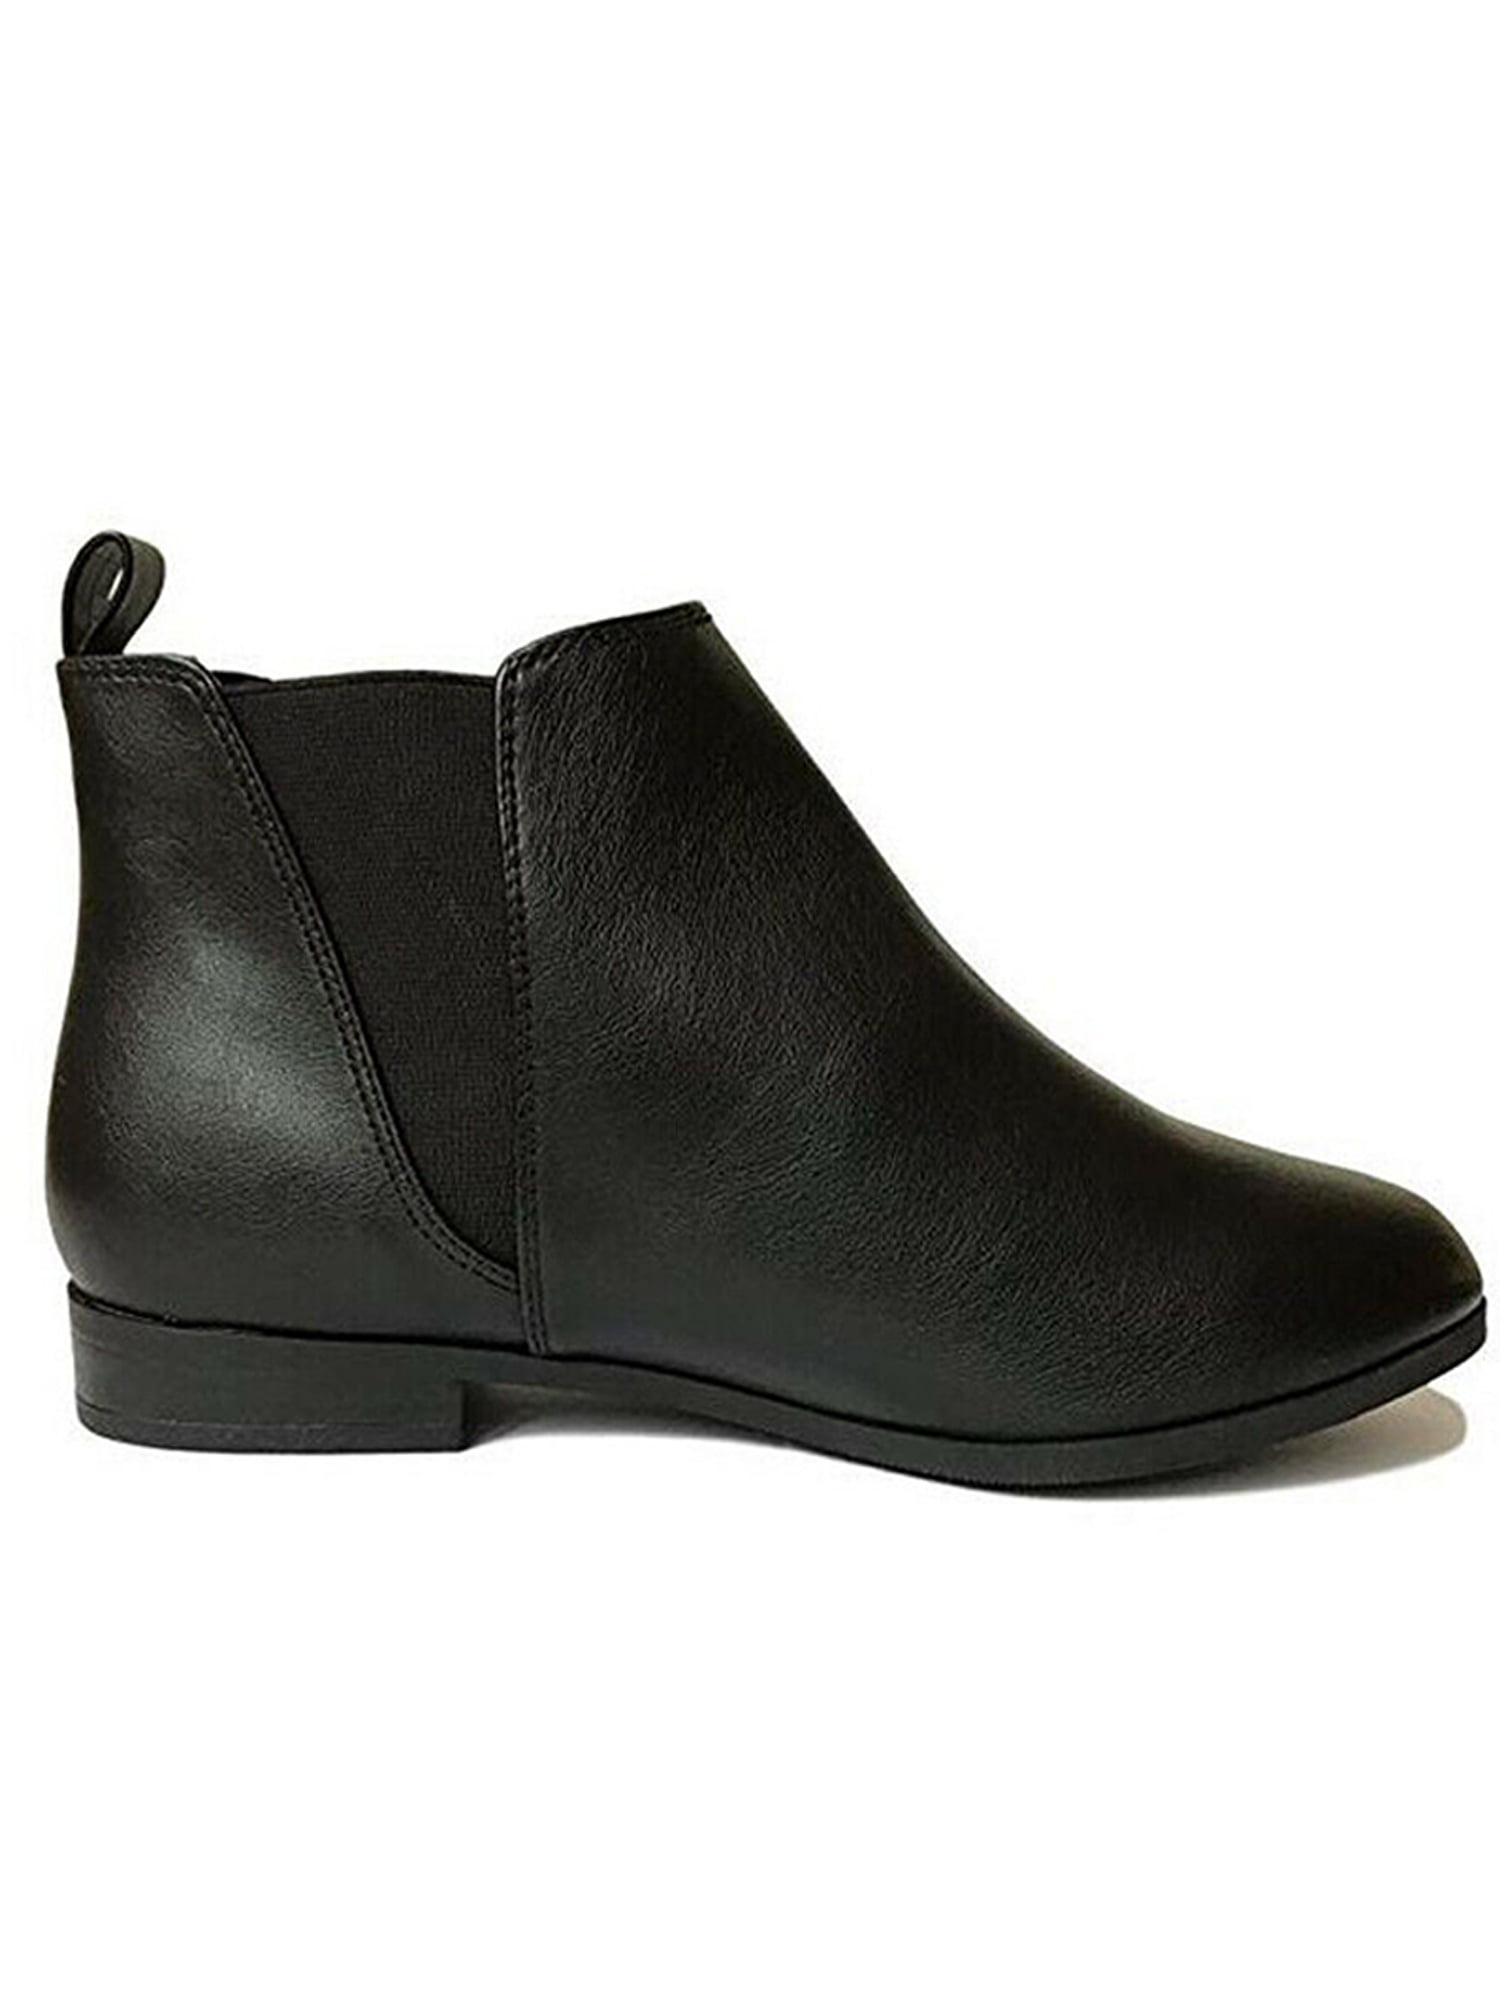 Classic Women's Round Toe Low Heel Chelsea Casual Ankle Boots 50 51 52 Outdoor D 